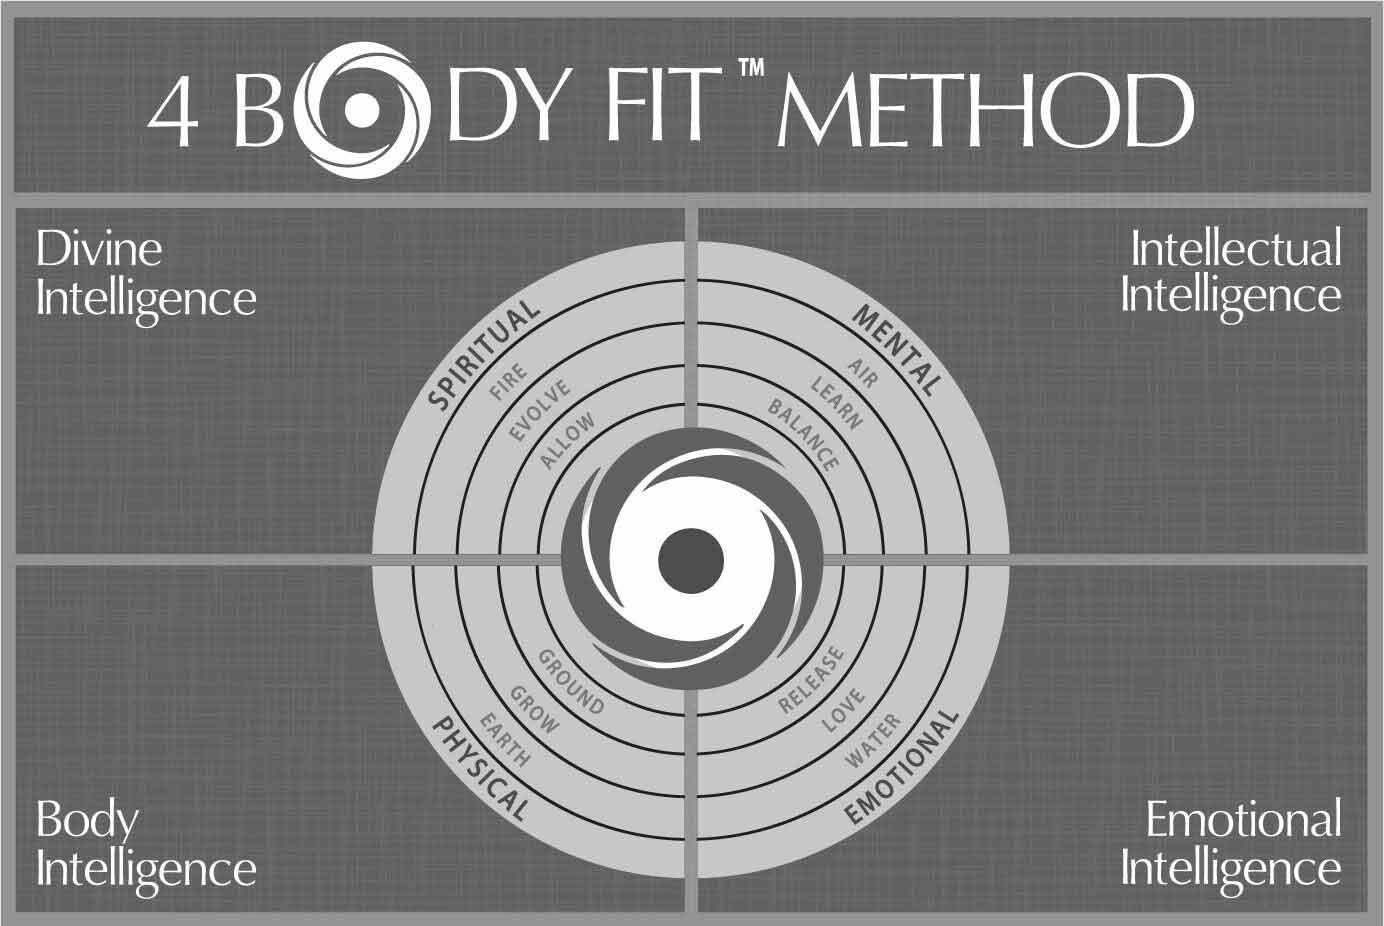 A gray and white diagram of the body fit method.